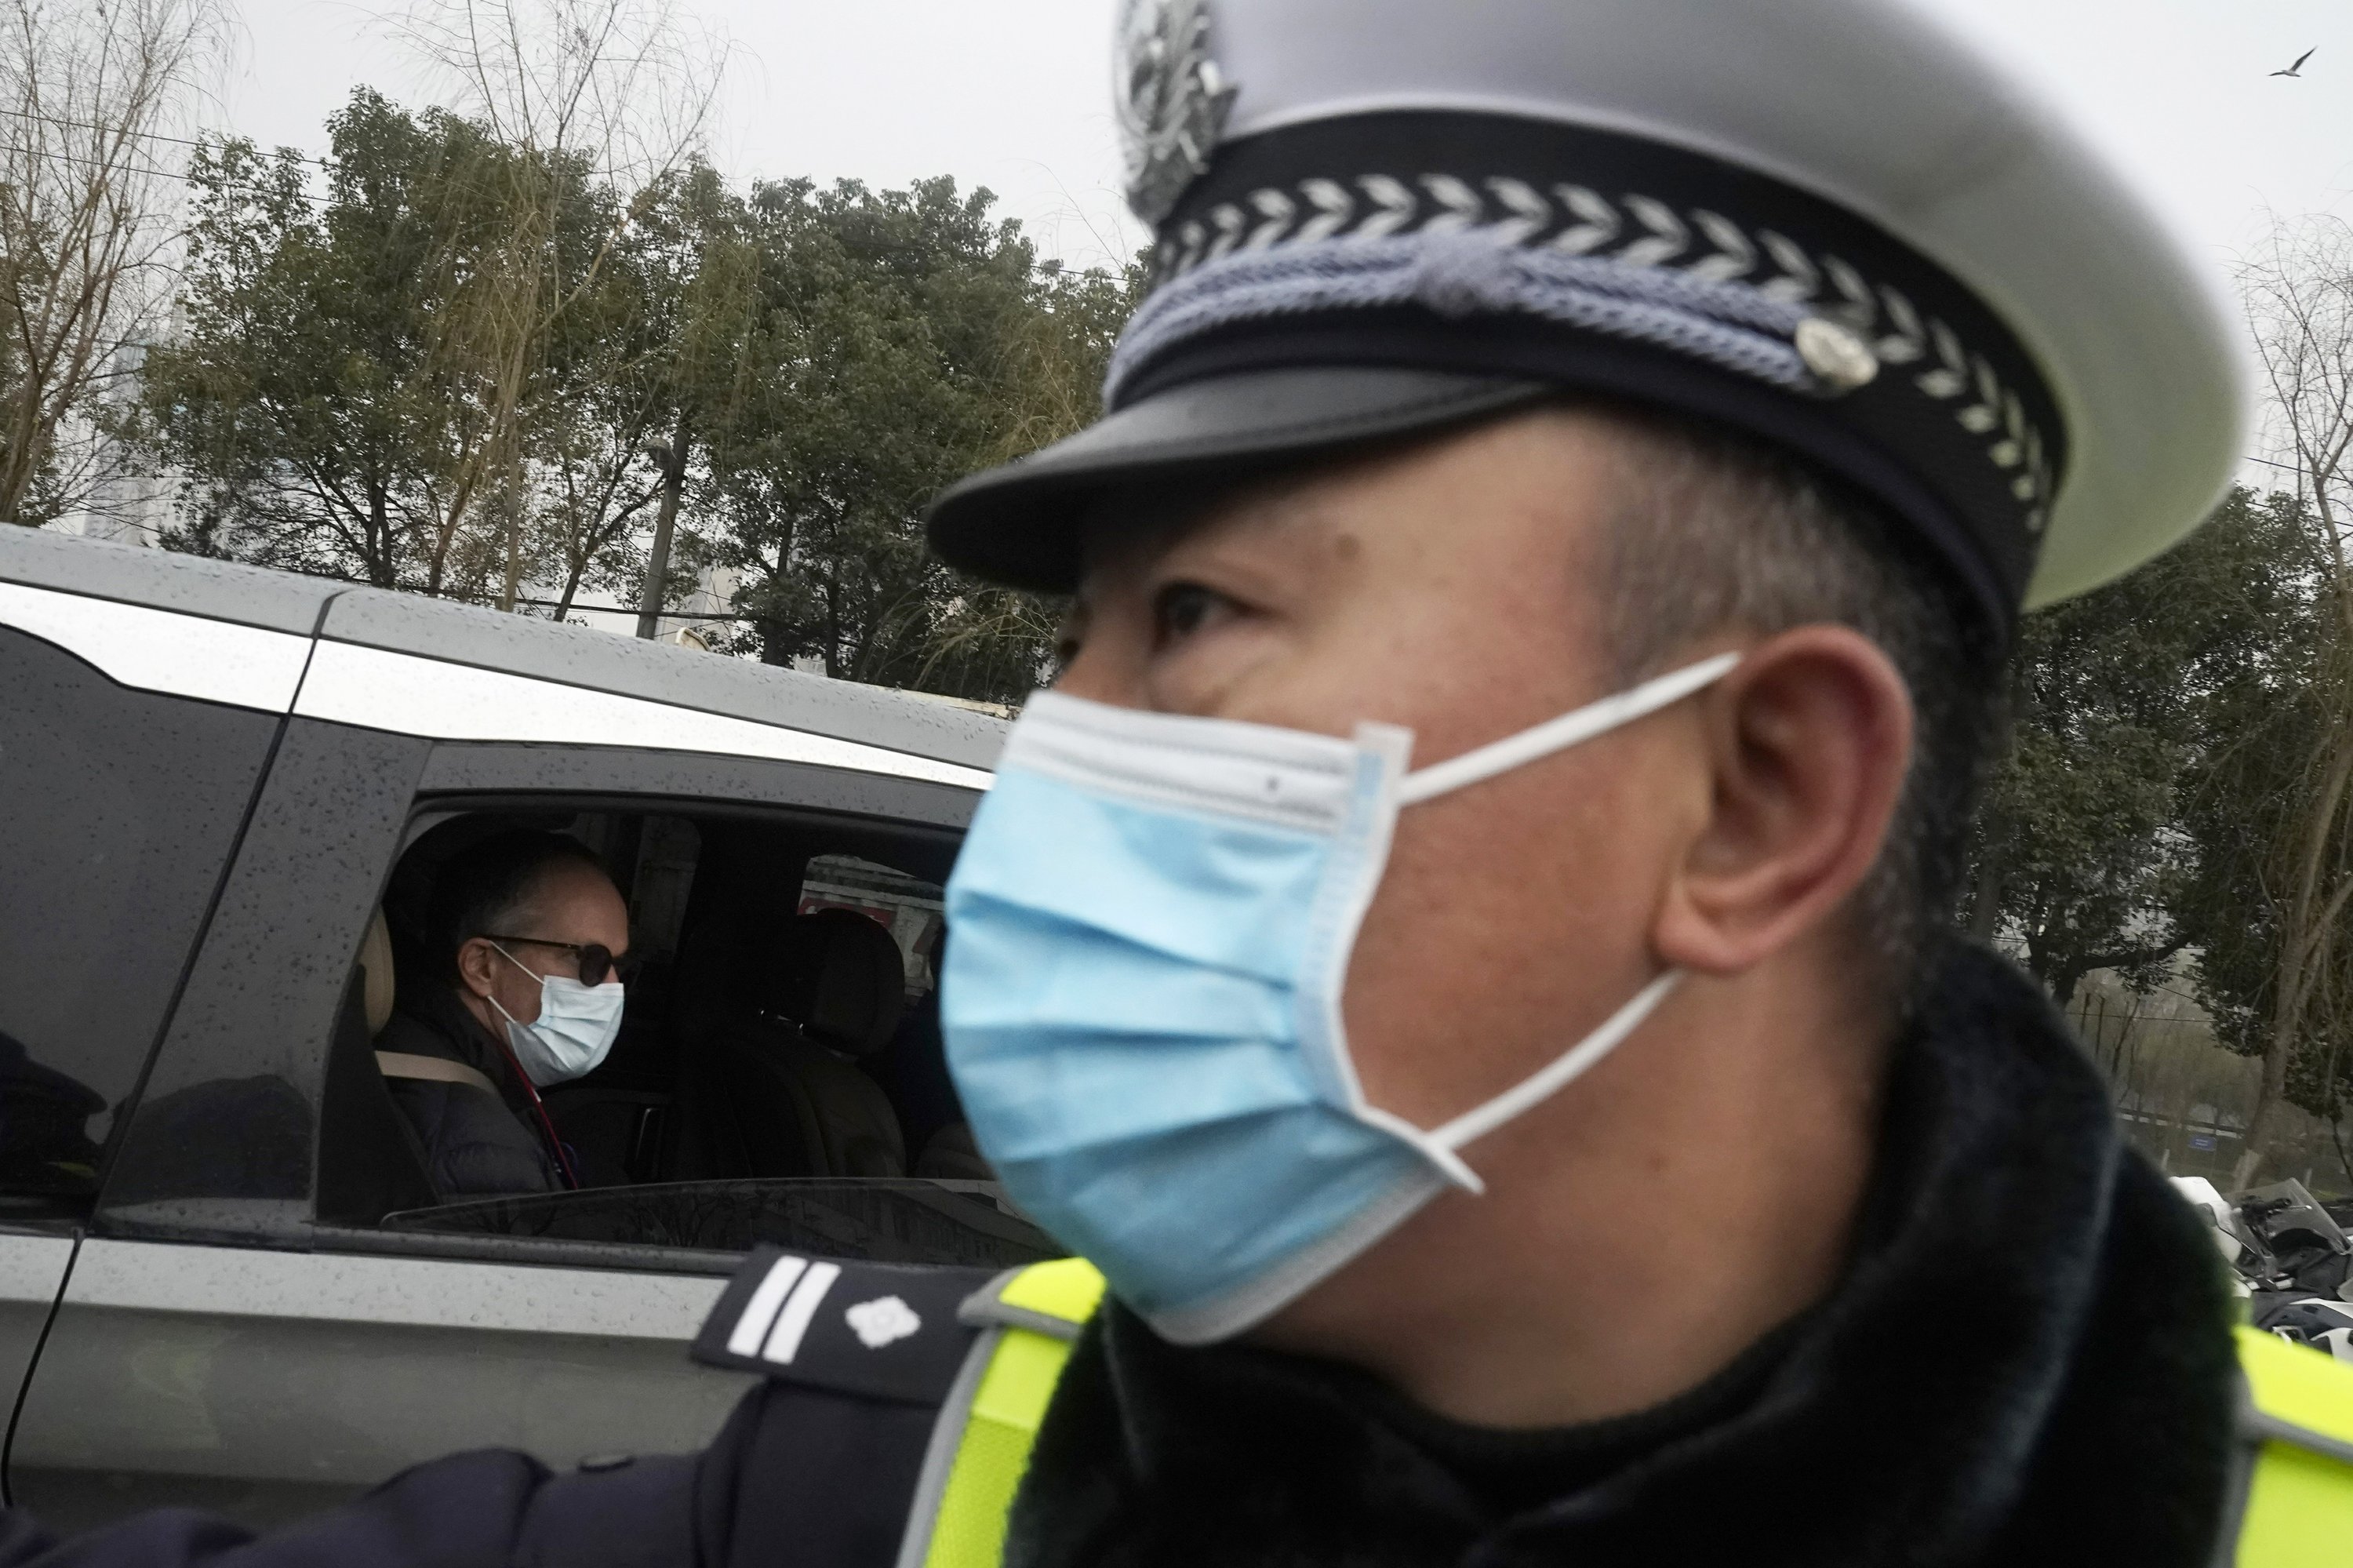 WHO teams visits Wuhan food market in search of virus clues - The Associated Press